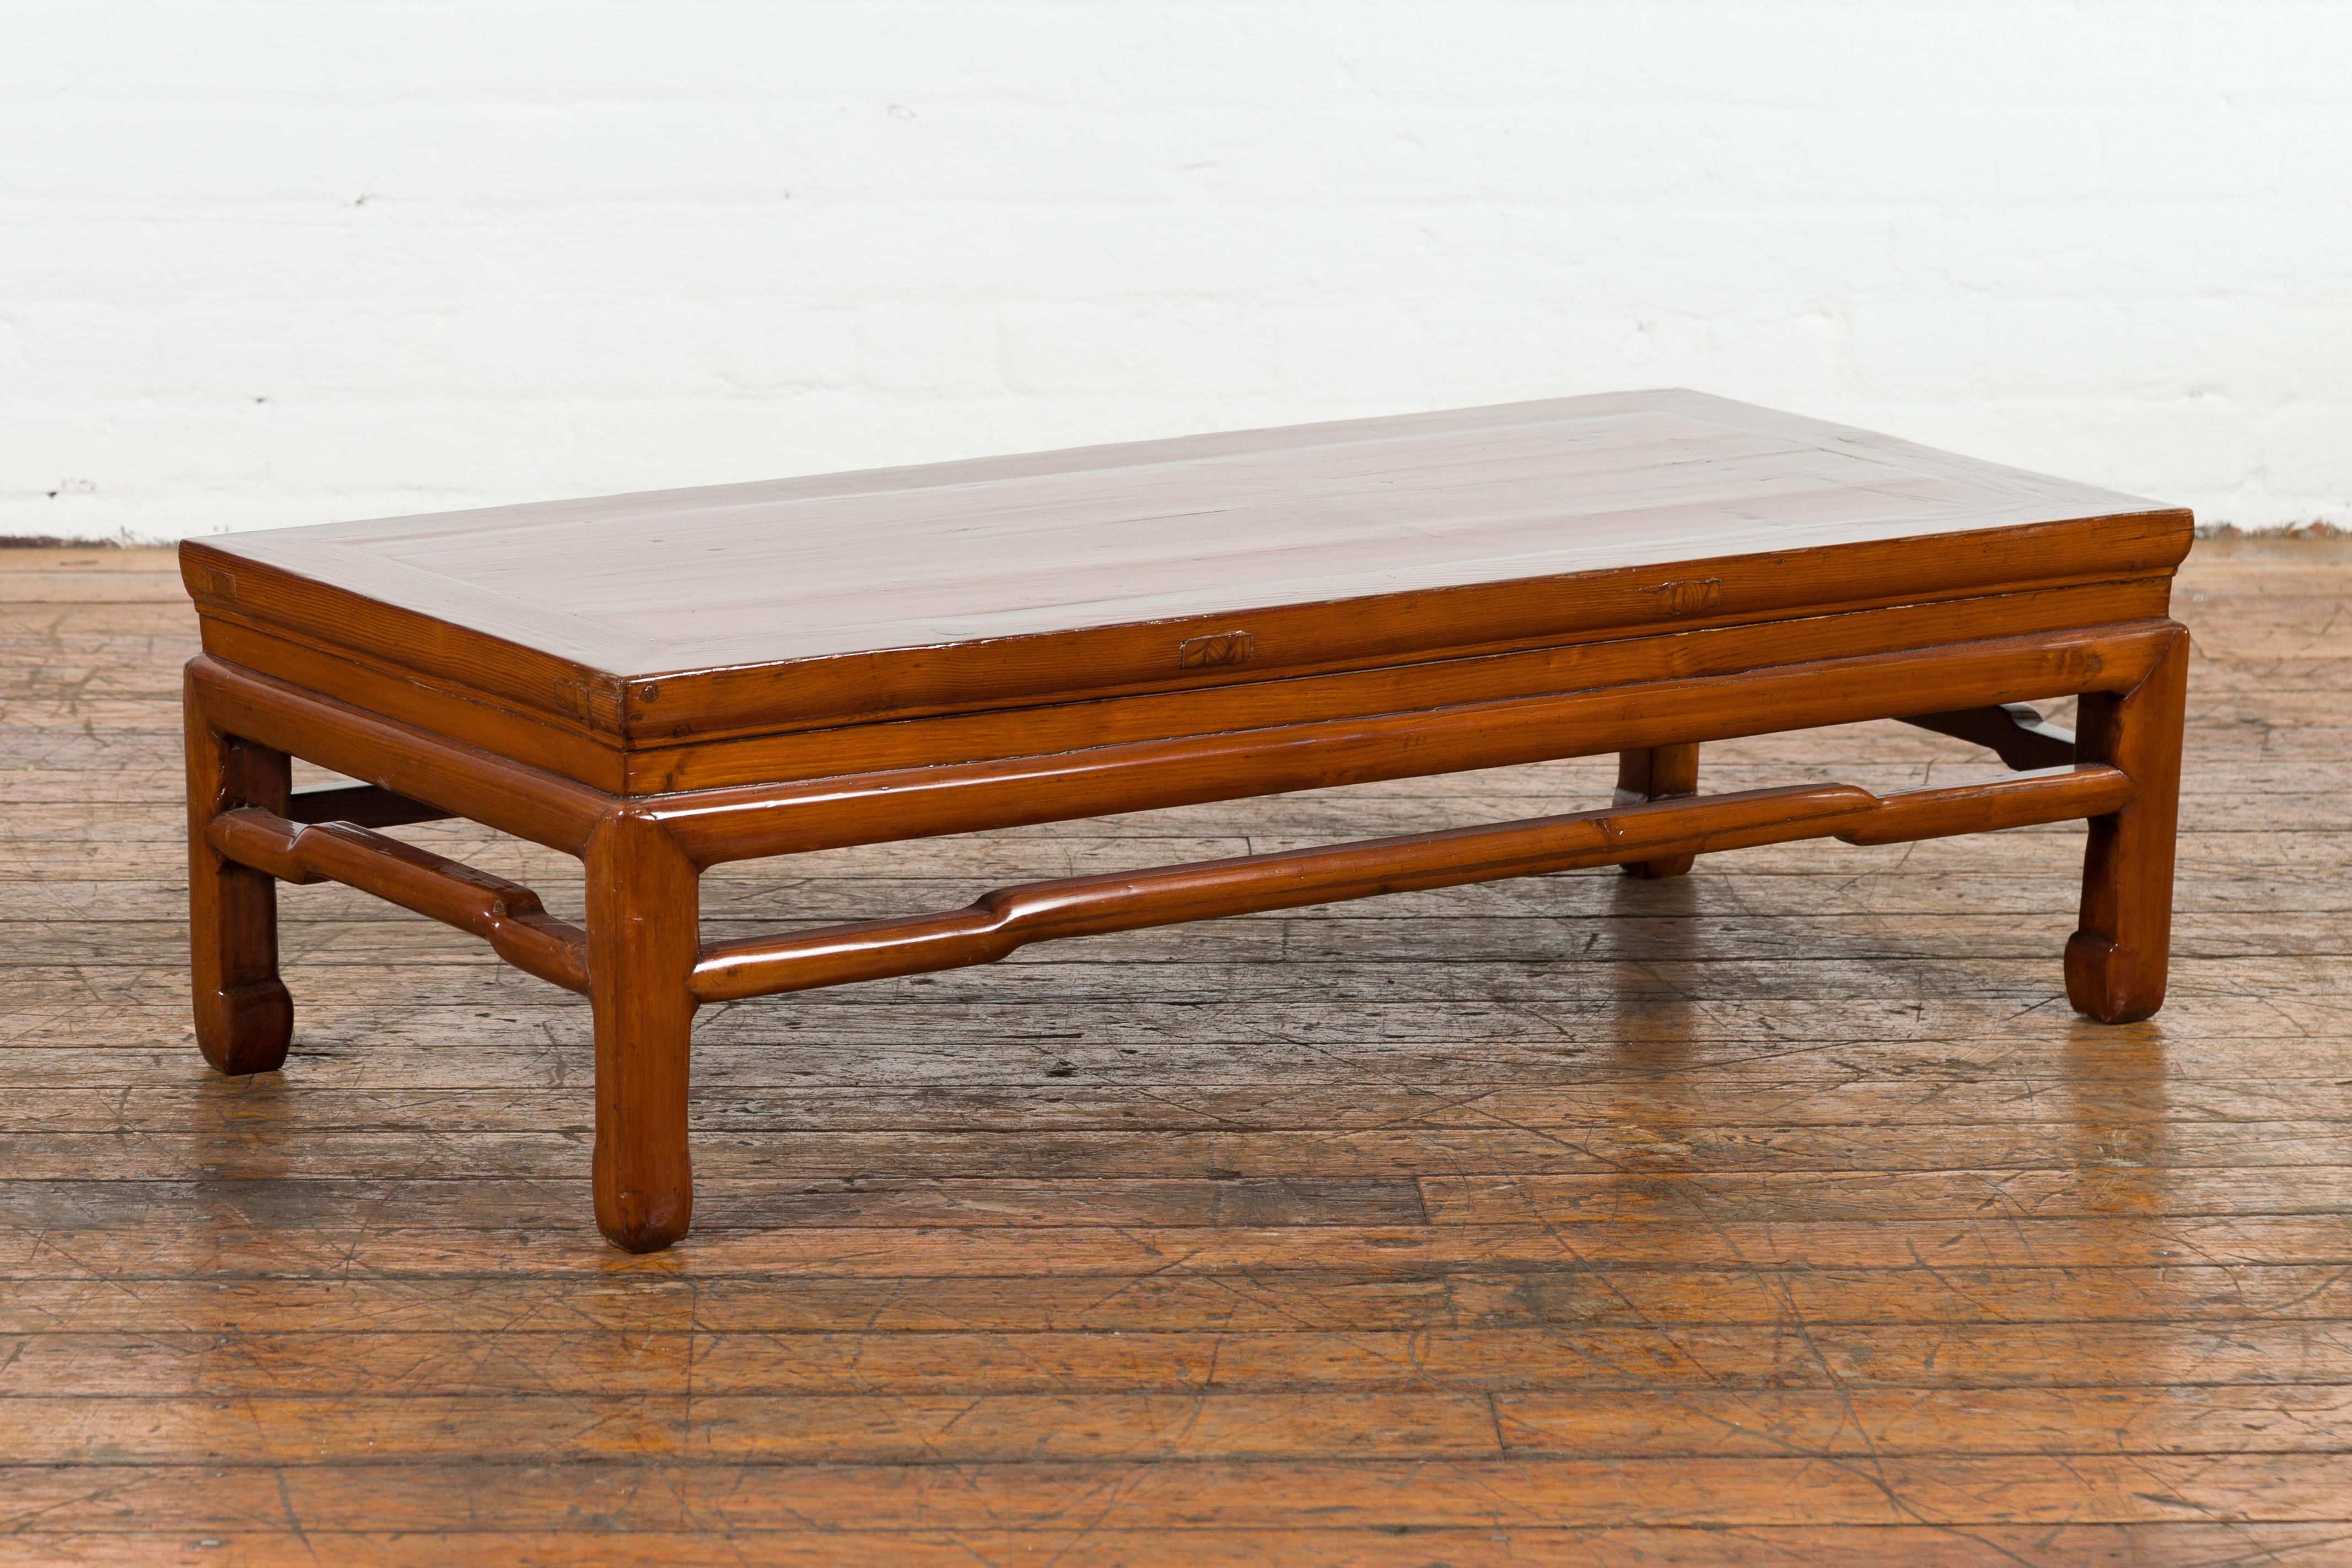 Carved Chinese Late Qing Dynasty Period Low Kang Coffee Table with Brown Lacquer For Sale